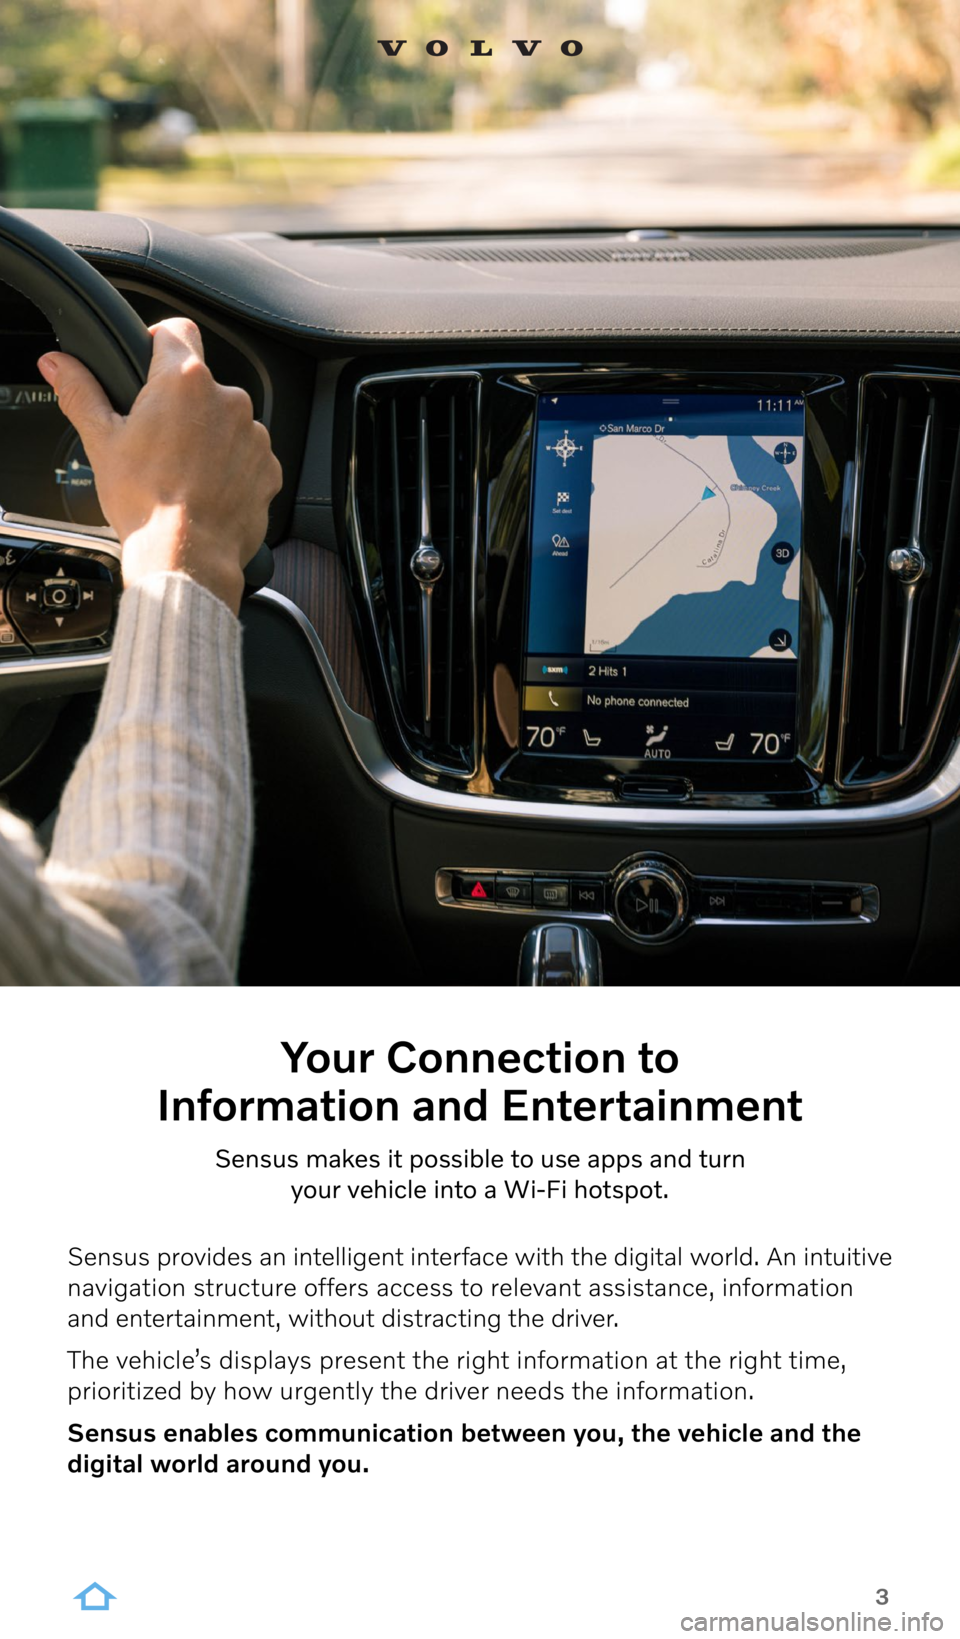 VOLVO V60 RECHARGE 2022  Sensus Digital Guide 3
Your Connection to  
Information and Entertainment
Sensus makes it possible to use apps and turn  
your vehicle into a Wi-Fi hotspot.
Sensus provides an intelligent interface with the digital world.